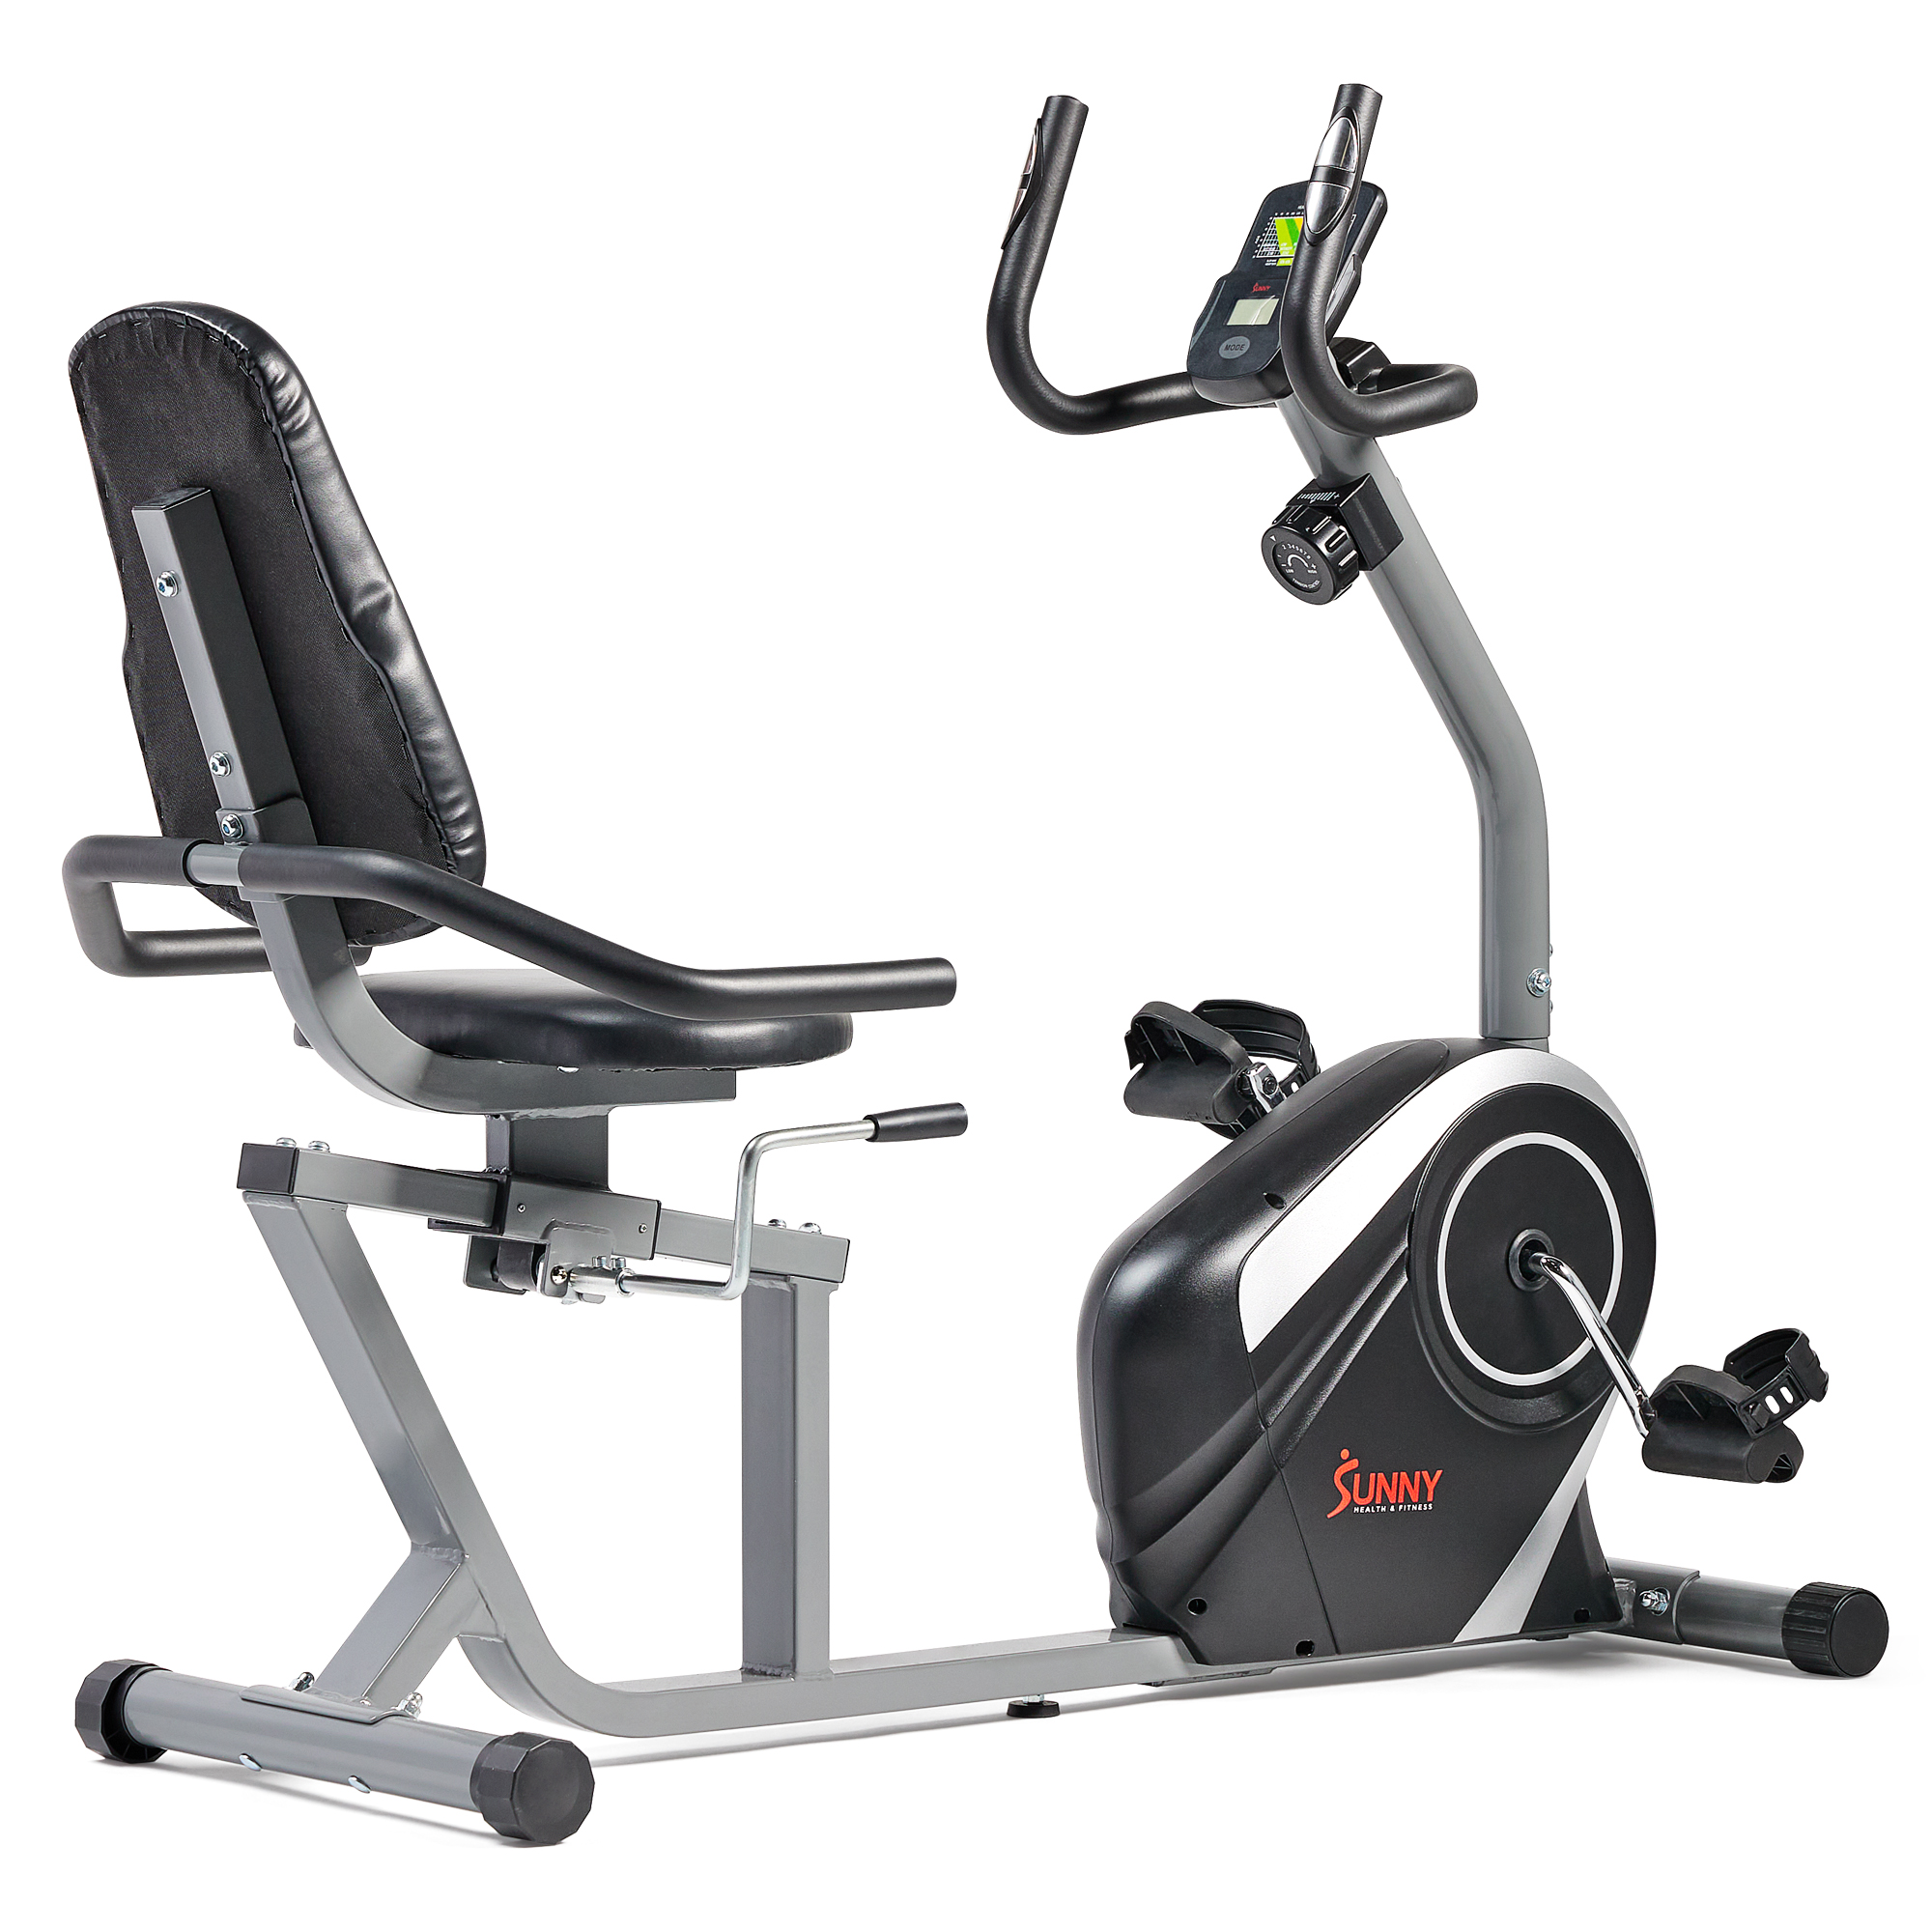 Sunny Health & Fitness Magnetic Recumbent Bike Exercise Bike, 300lb Capacity, Easy Adjustable Seat, Monitor, Pulse Rate Monitoring - SF-RB4616S - image 3 of 5